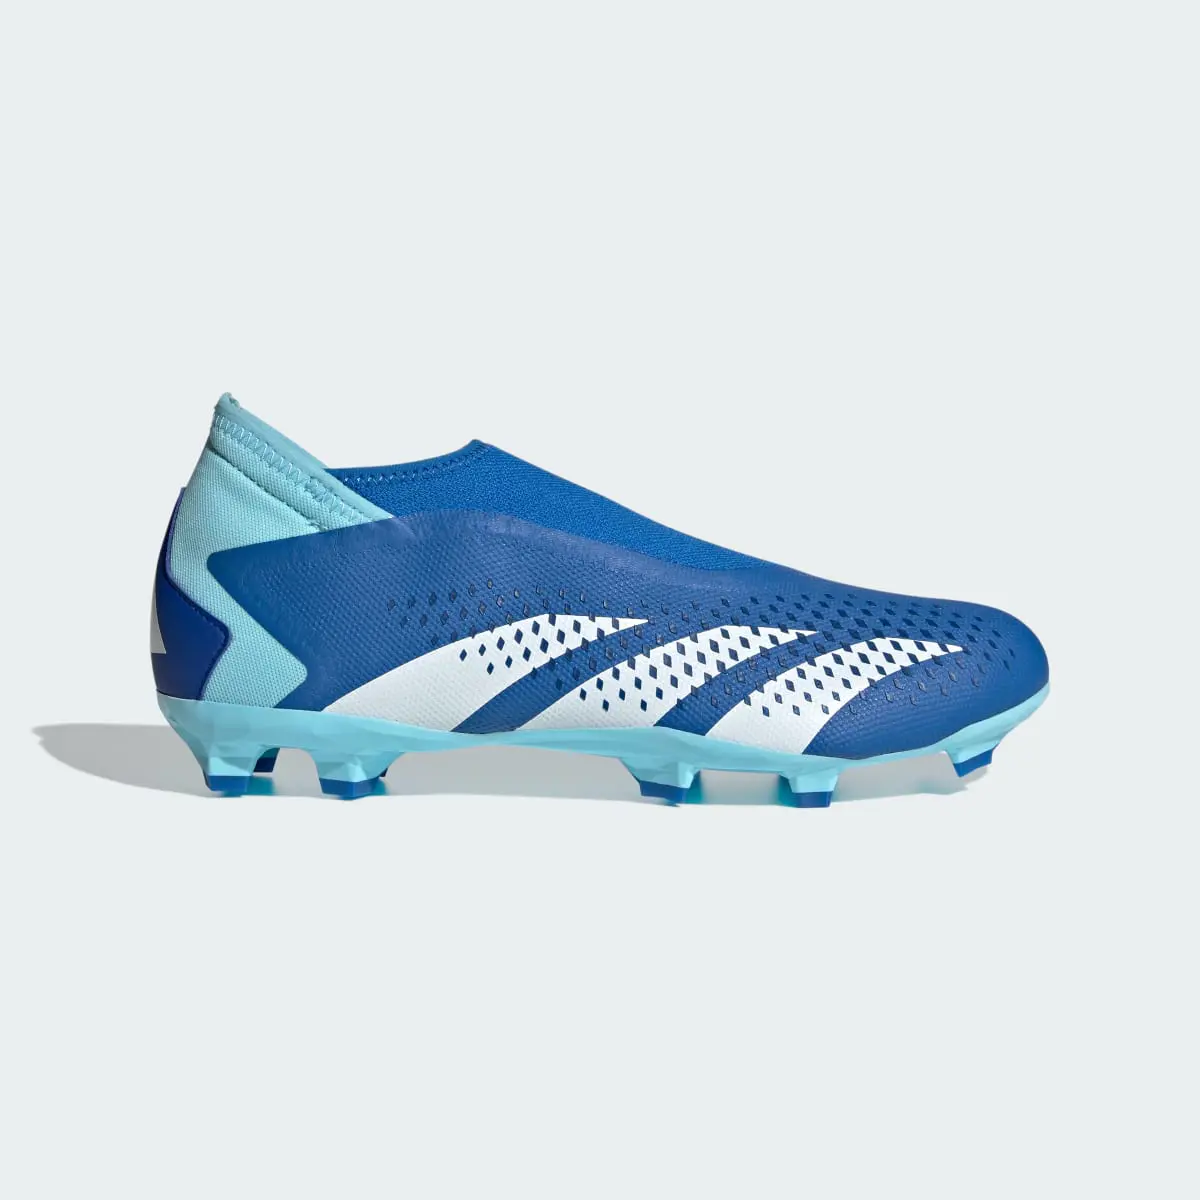 Adidas Predator Accuracy.3 Laceless Firm Ground Soccer Cleats. 2